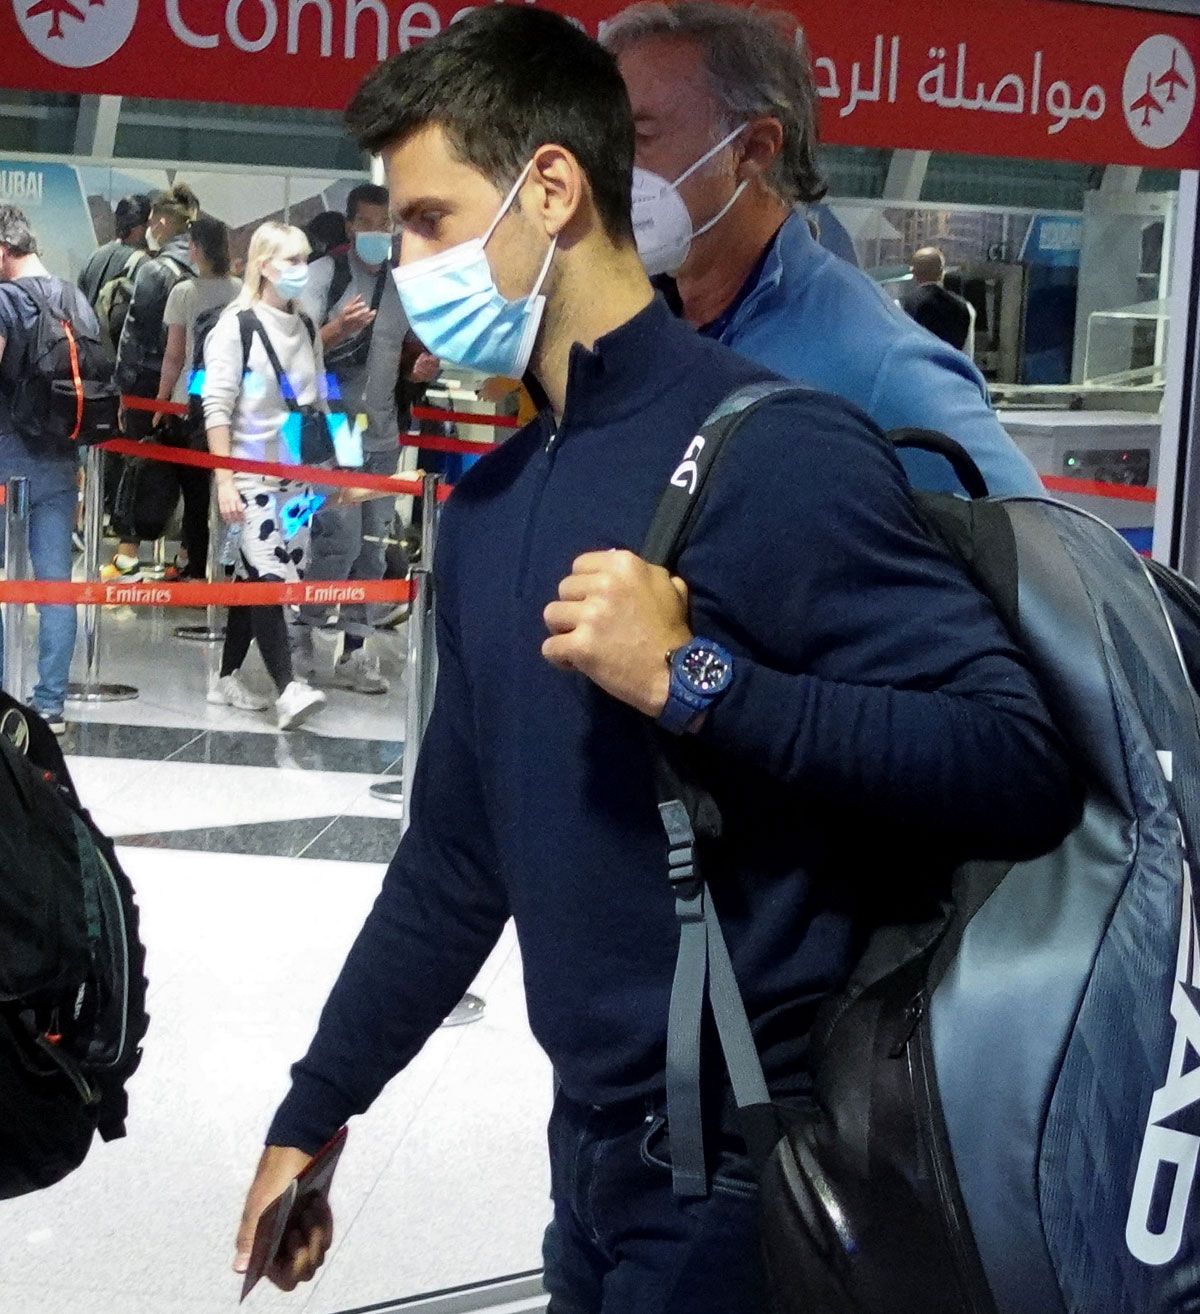 Novak Djokovic was kicked out of Australia because of his COVID-19 unvaccinated status. He was twice detained and then booted out by Australian immigration in Jan this year just before the commencement of thr 2022 Australian Open.